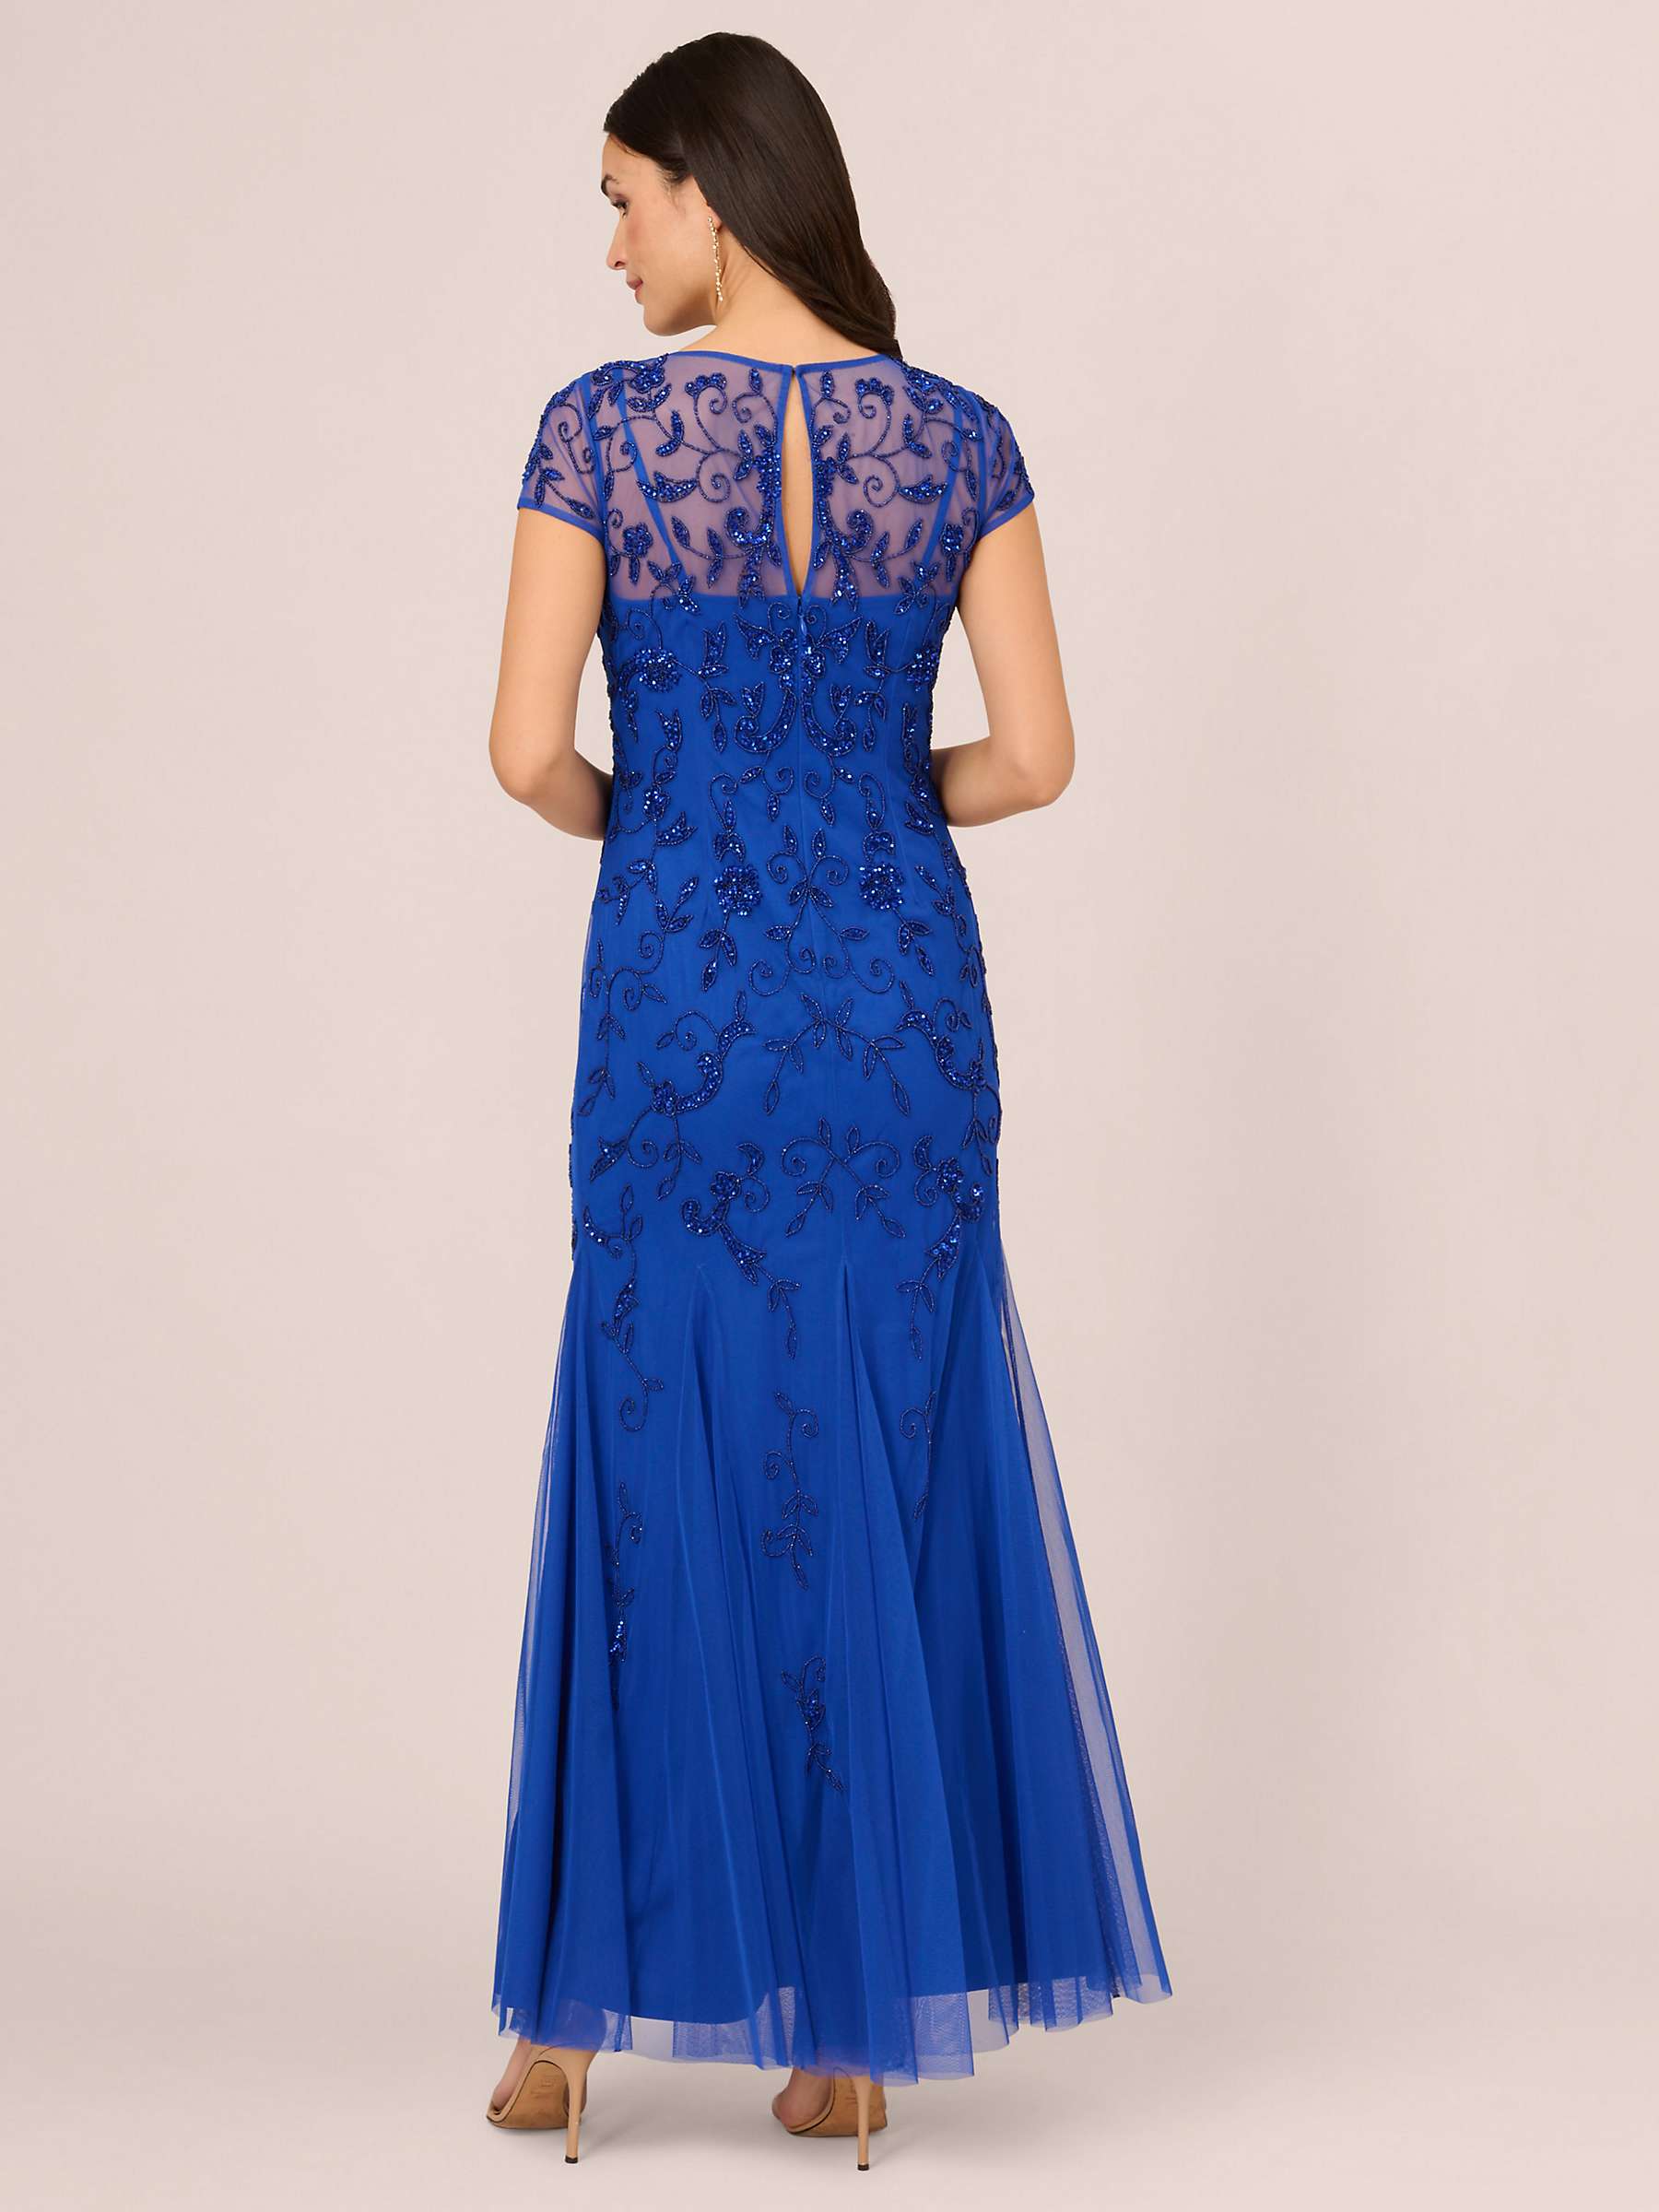 Buy Adrianna Papell Papell Studio Beaded Mesh Maxi Dress, Brilliant Sapphire Online at johnlewis.com